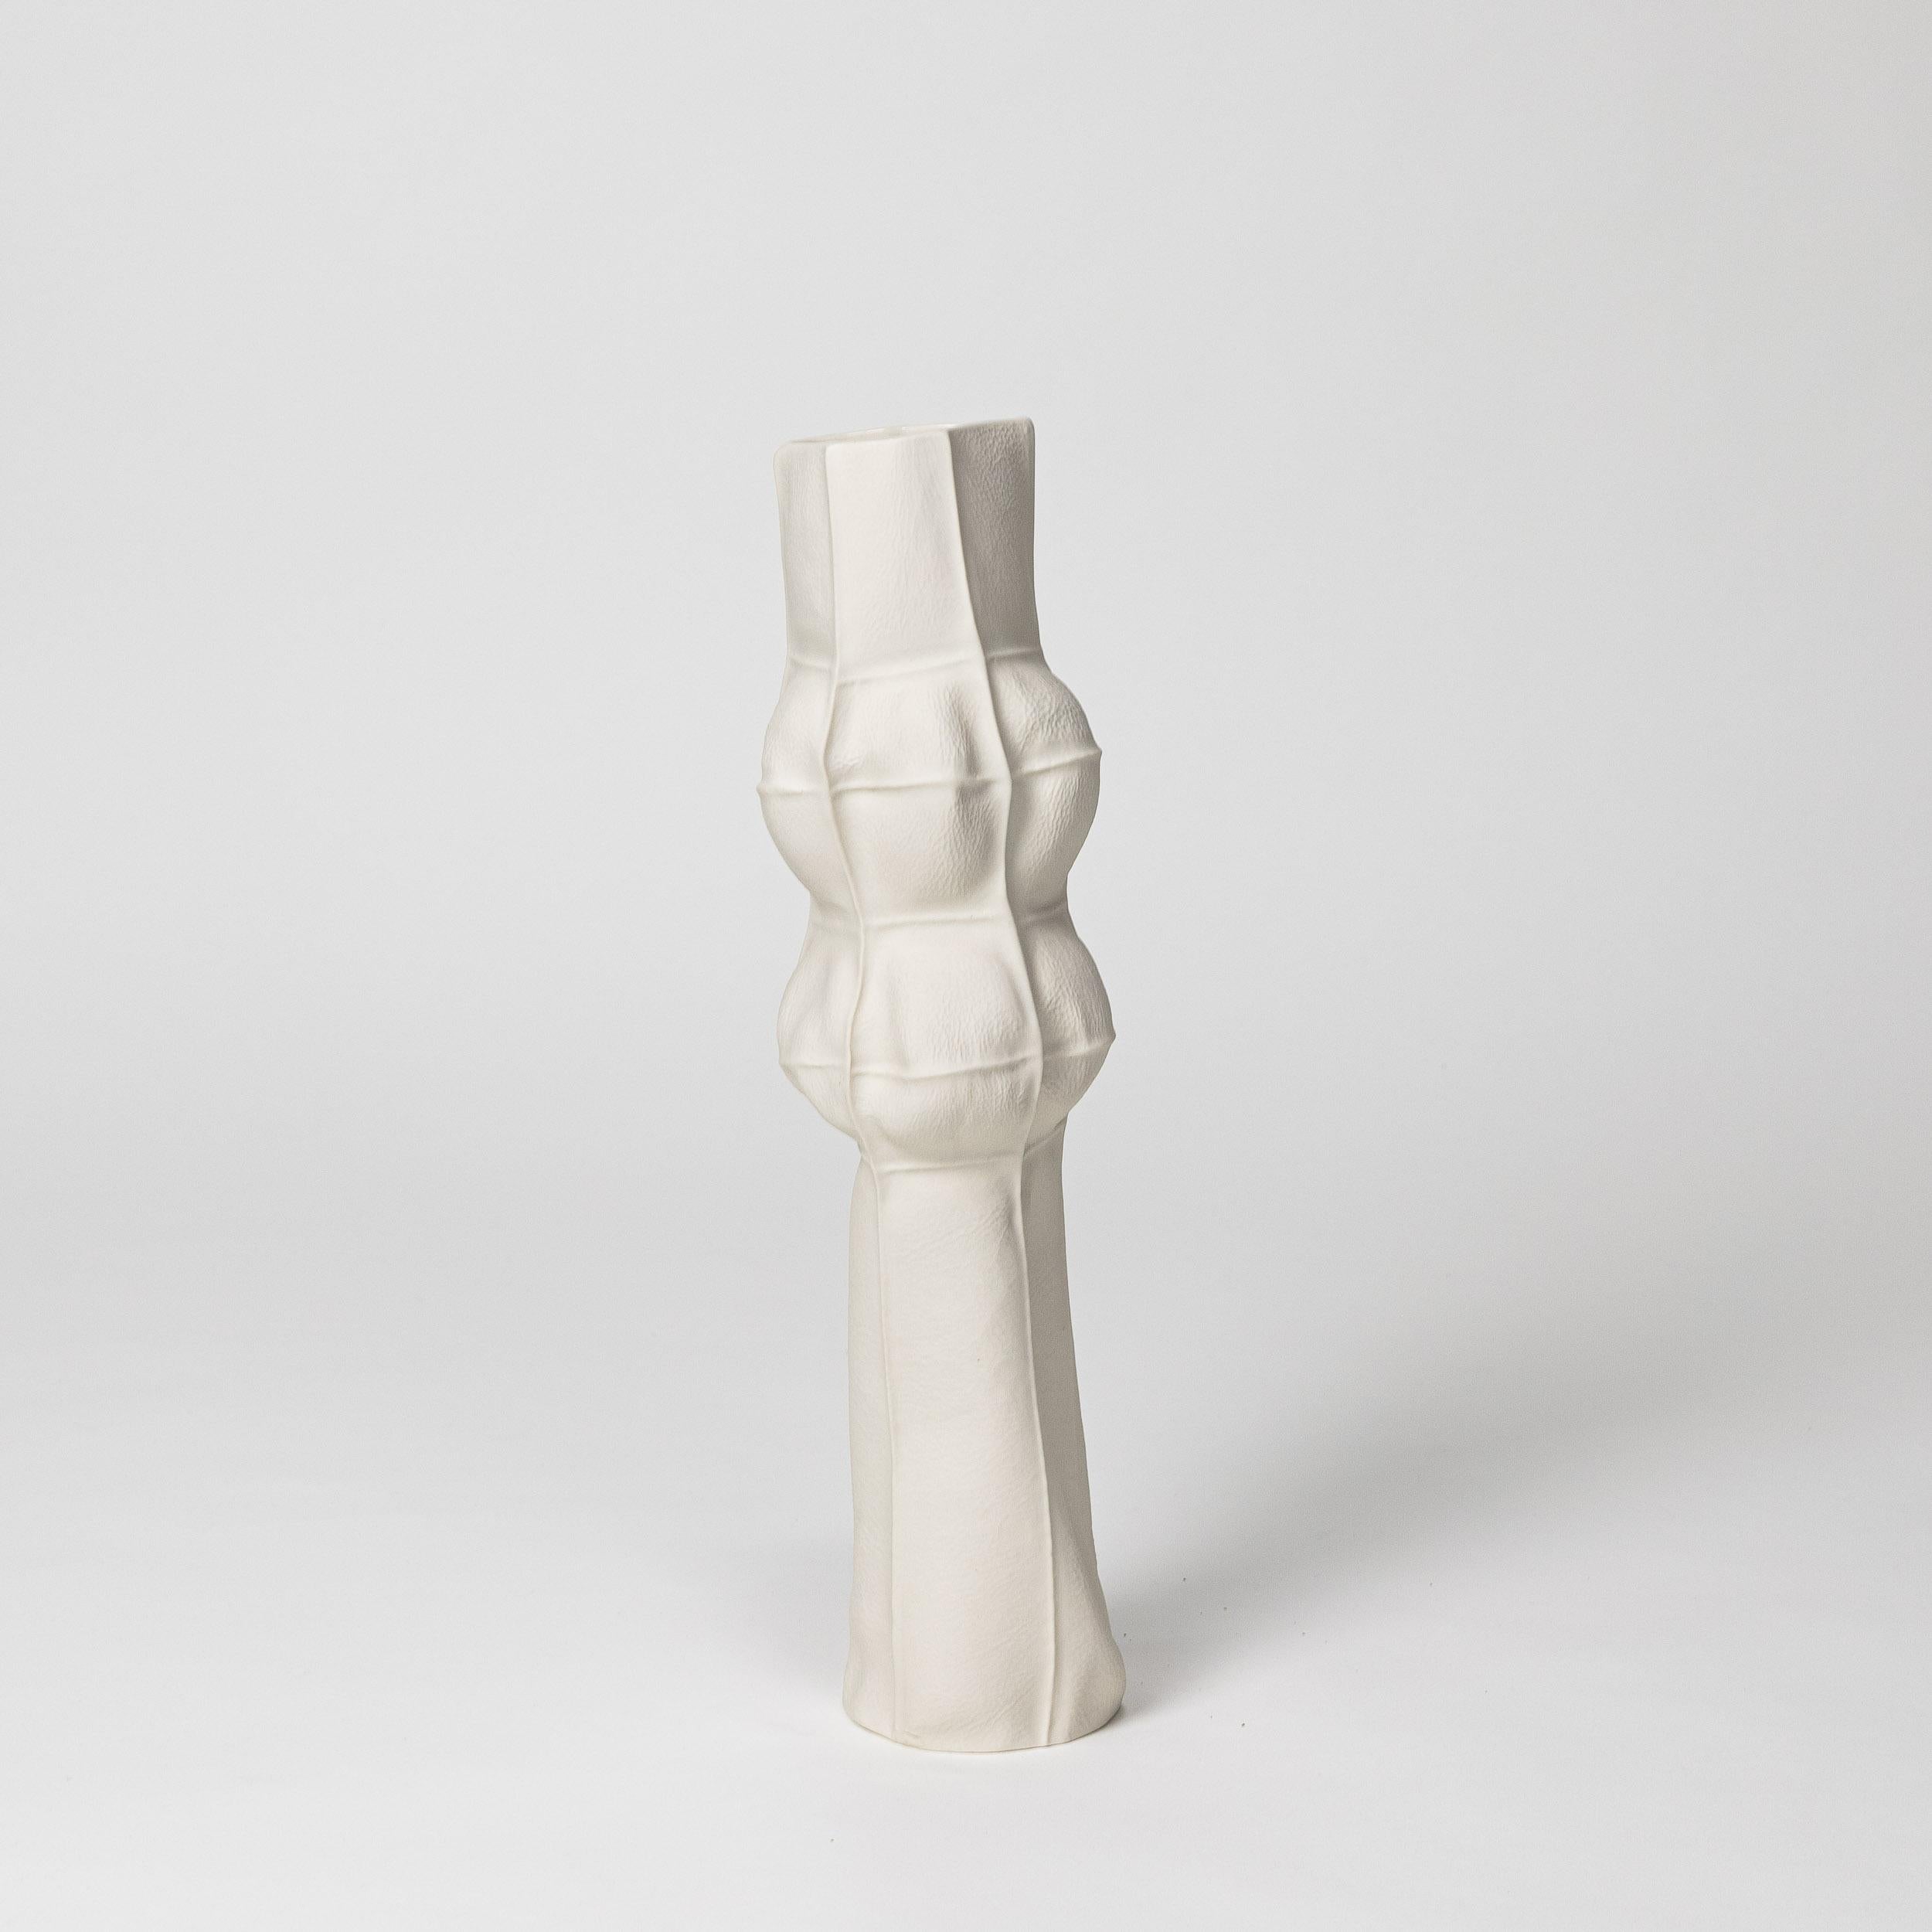 White Ceramic Kawa Vase #17, Organic Porcelain Flower Vase, Tactile In New Condition For Sale In Brooklyn, NY